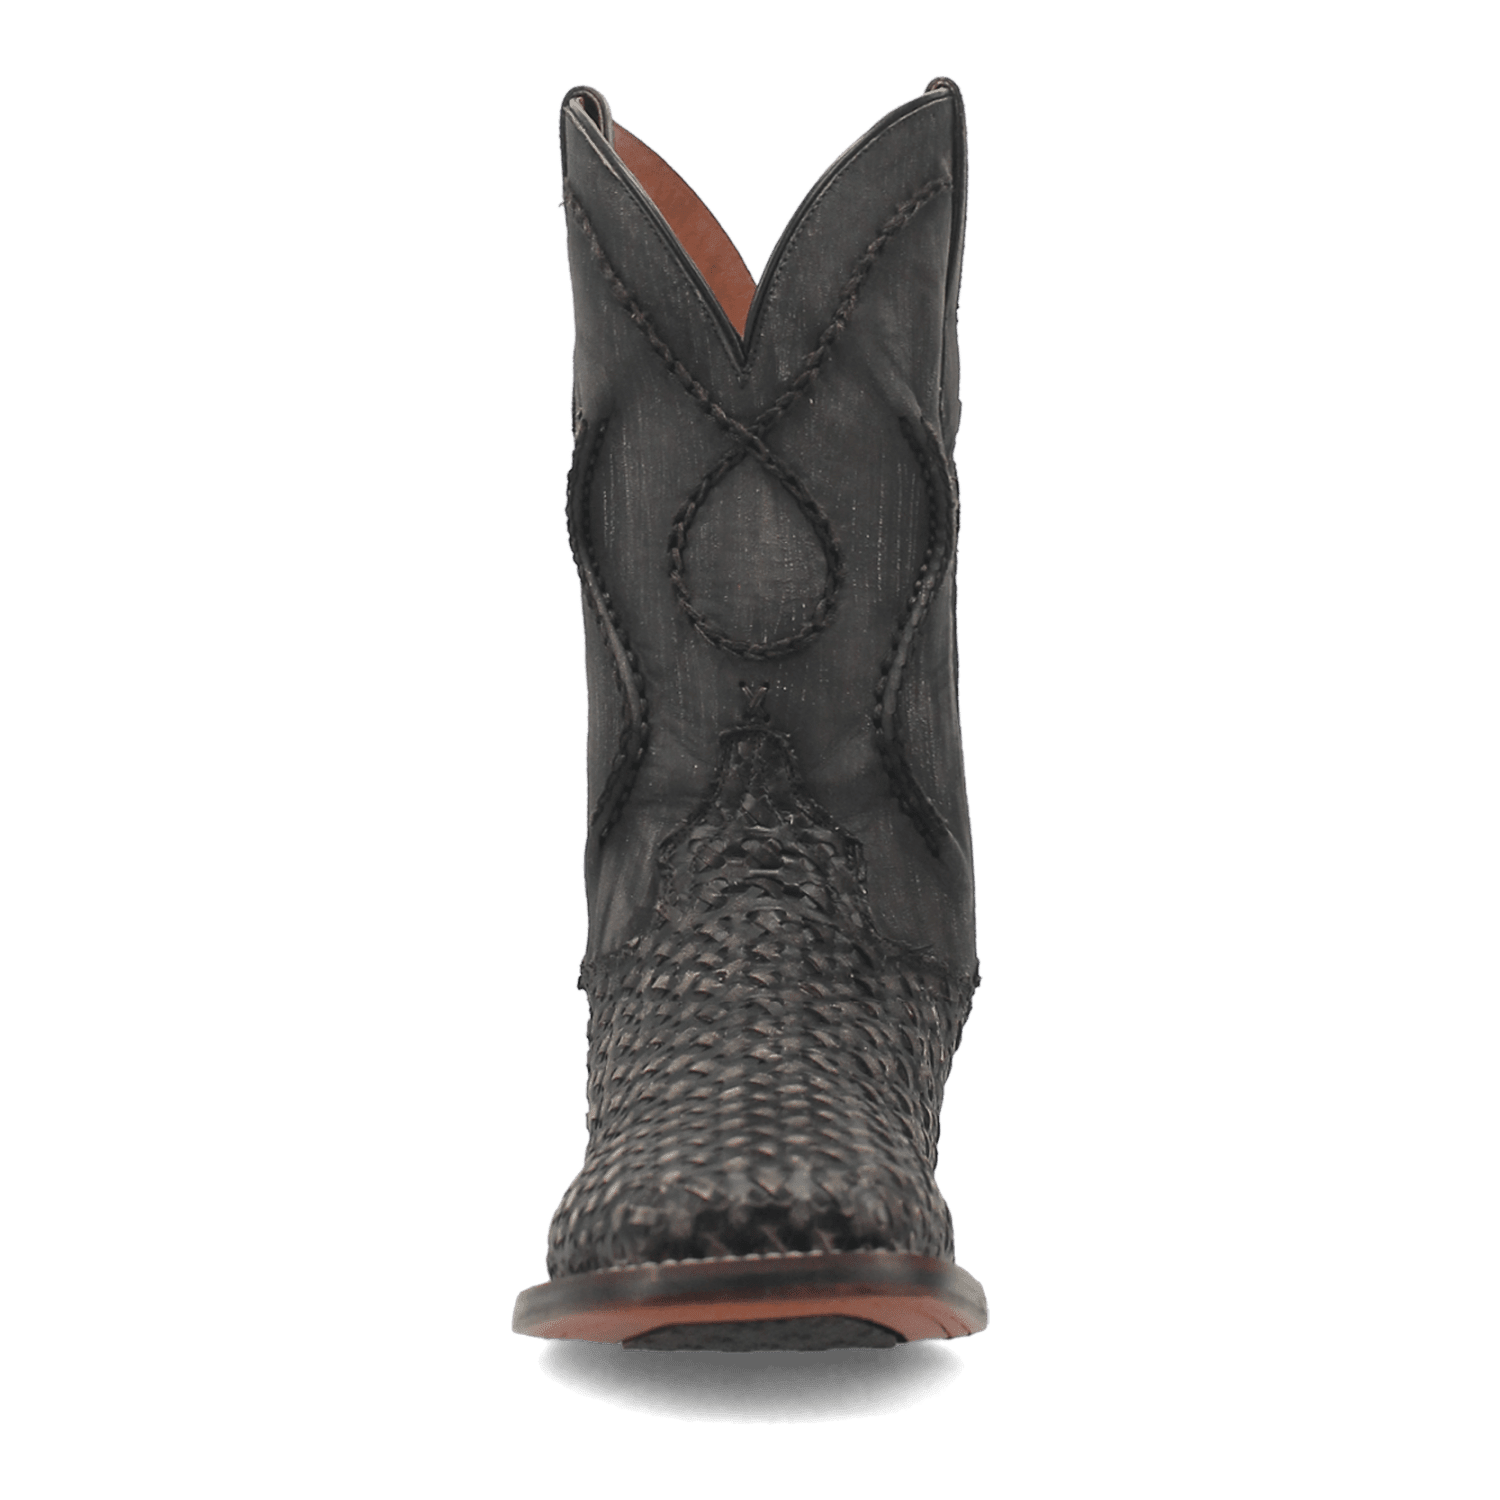 STANLEY LEATHER BOOT Image